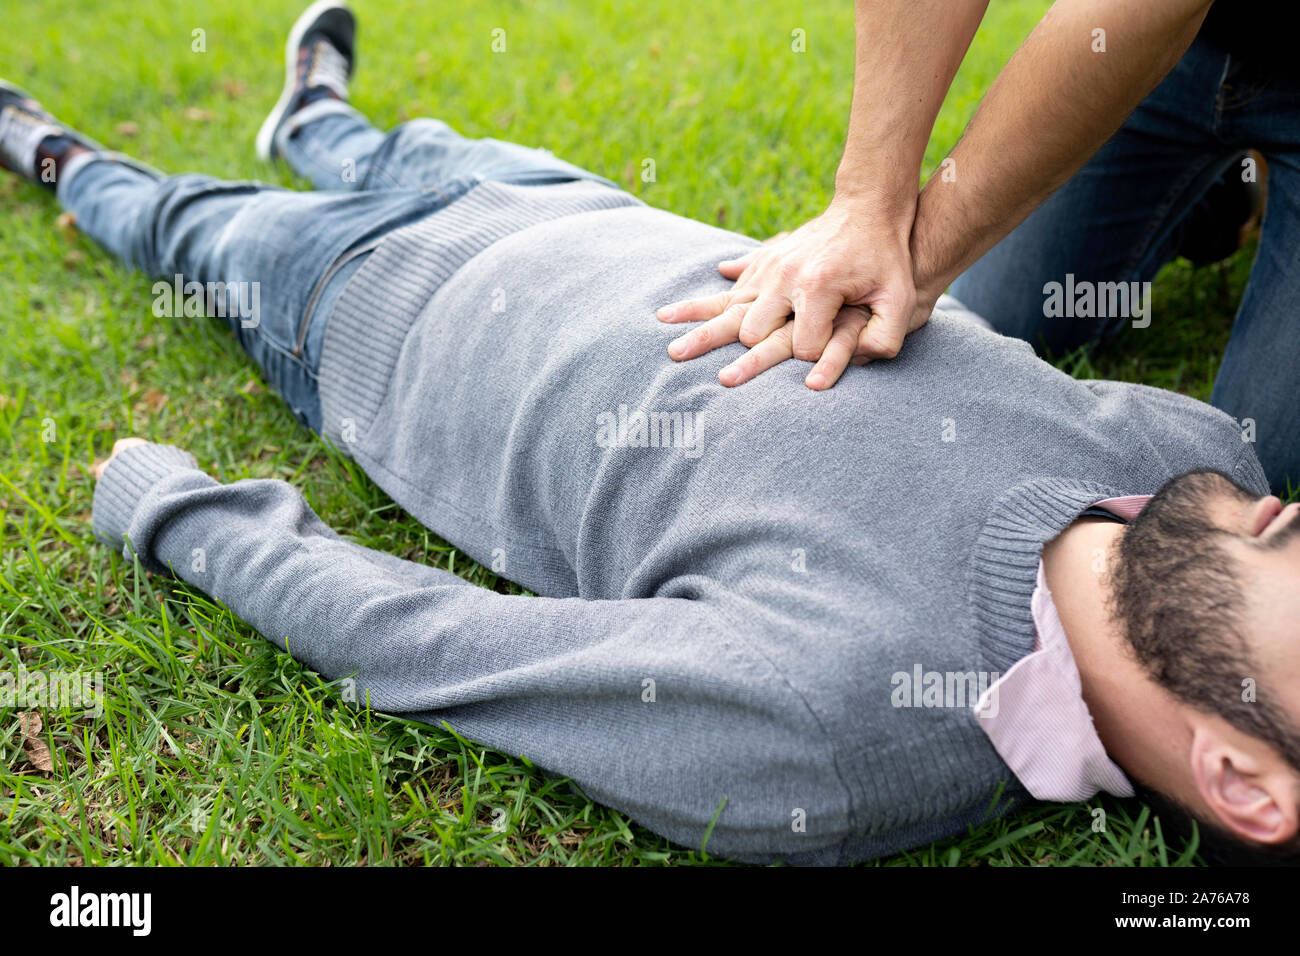 First Aid Emergency CPR rcp on Heart Attack Man , Resuscitation cardio Stock Photo